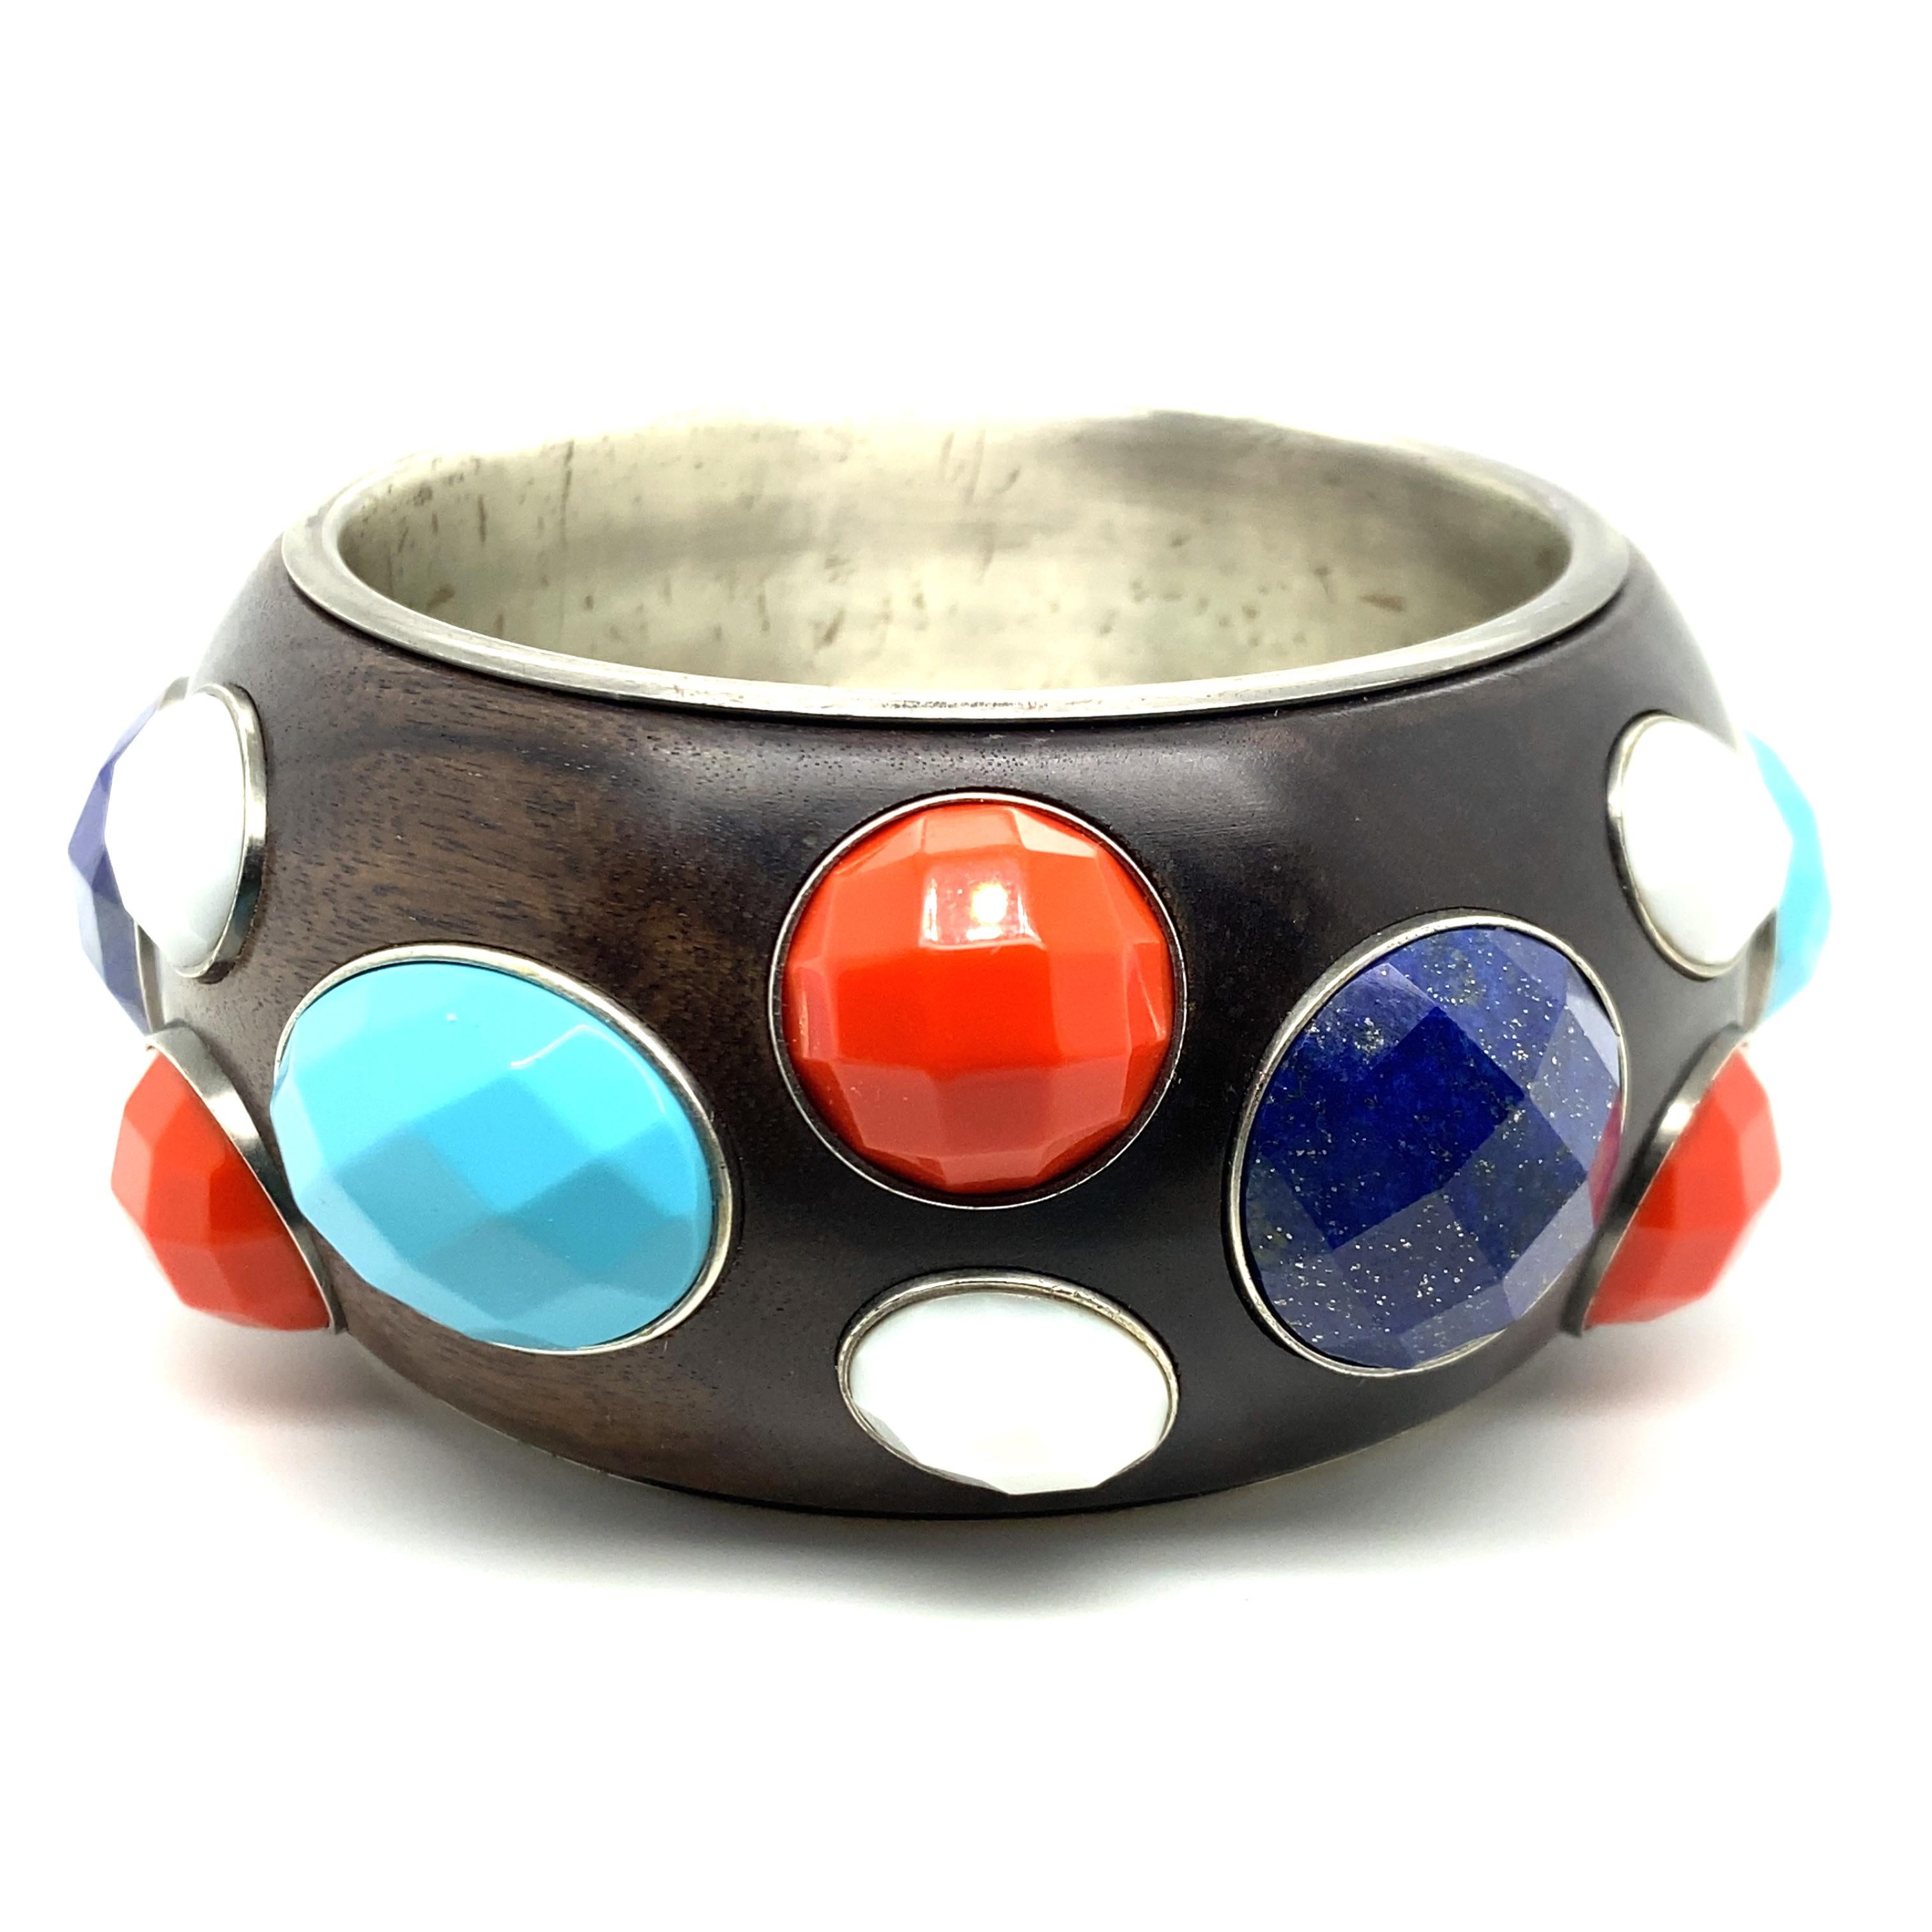 A Sterling Silver, Wood and Glass Bangle Bracelet by Bottega Veneta,
Consisting of a sterling bangle bracelet with inlaid wood and oval shape checkerboard cut synthetic stones in turquoise, red, blue and white. Resembling turquoise, red and white